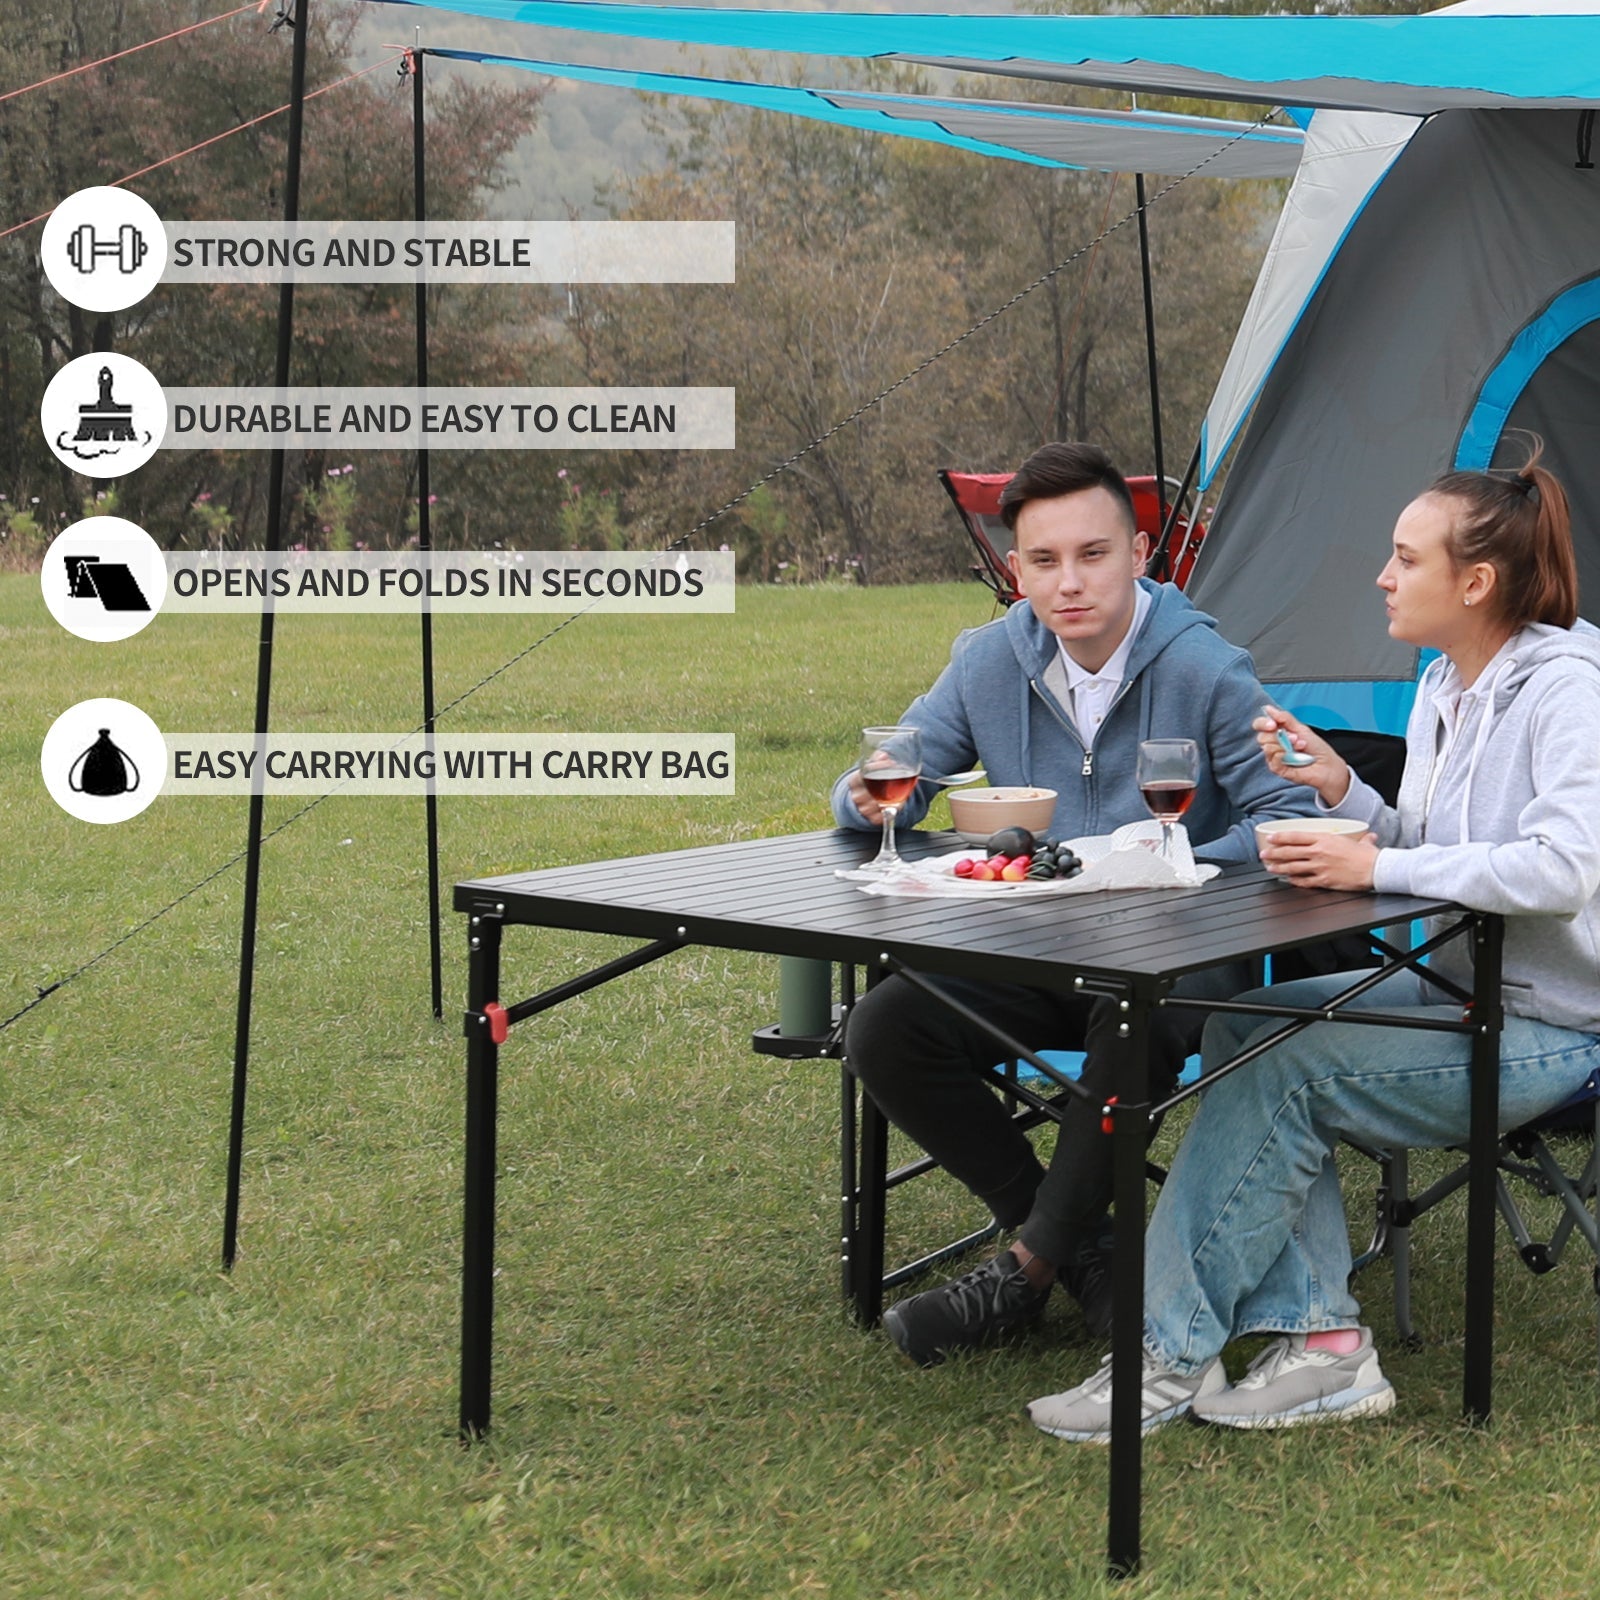 MSSOHKAN Camping Table Folding Portable Camp Side Table Aluminum  Lightweight Carry Bag Beach Outdoor Hiking Picnics BBQ Cooking Dining  Kitchen